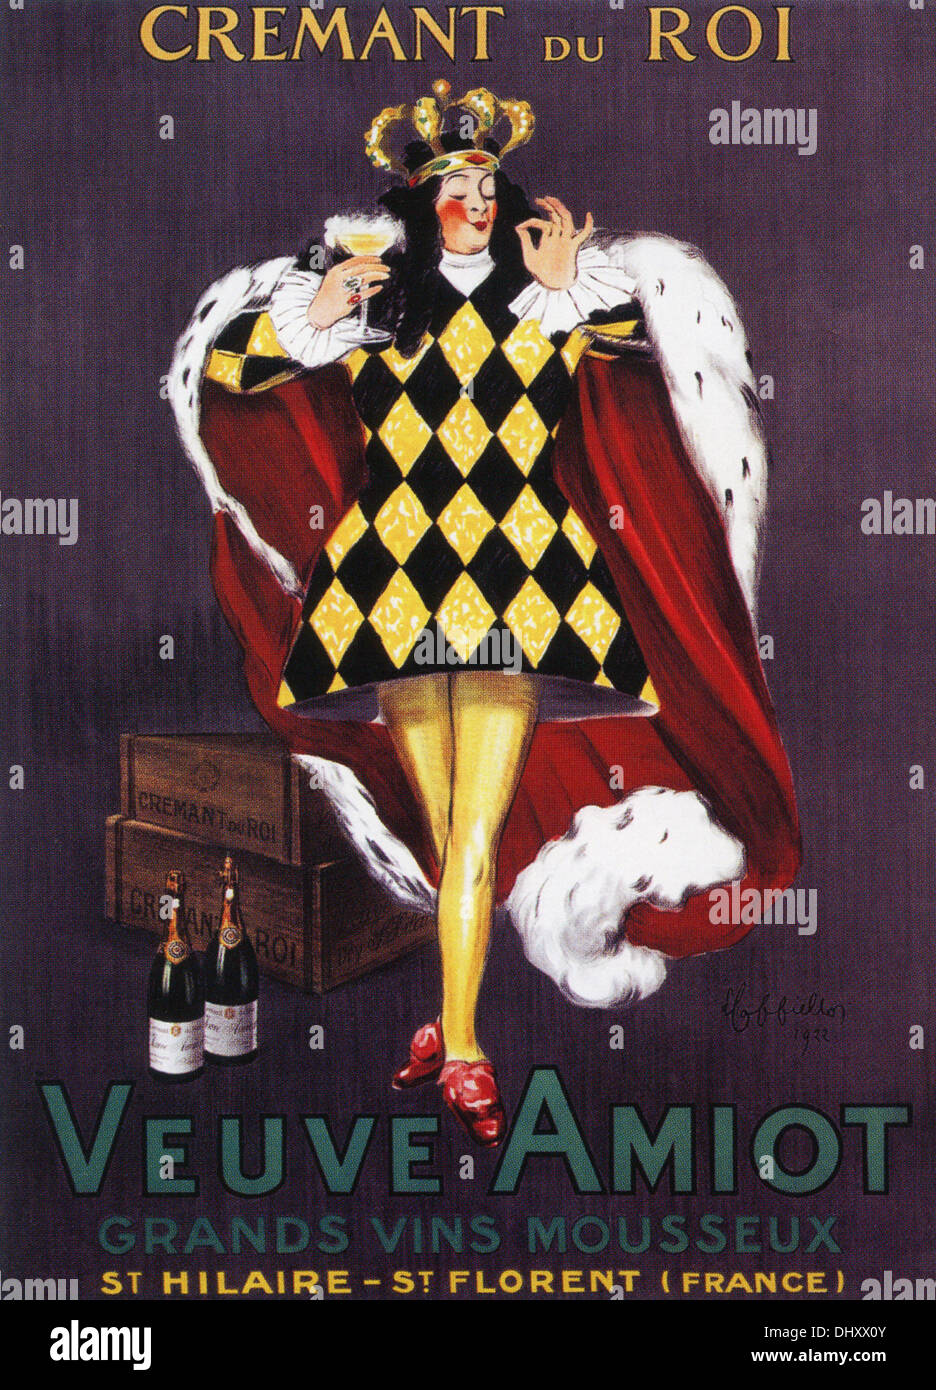 Cremant du Roi Veuve Amiot vine ad - a vintage poster, 1922 - Editorial use only. Stock Photo